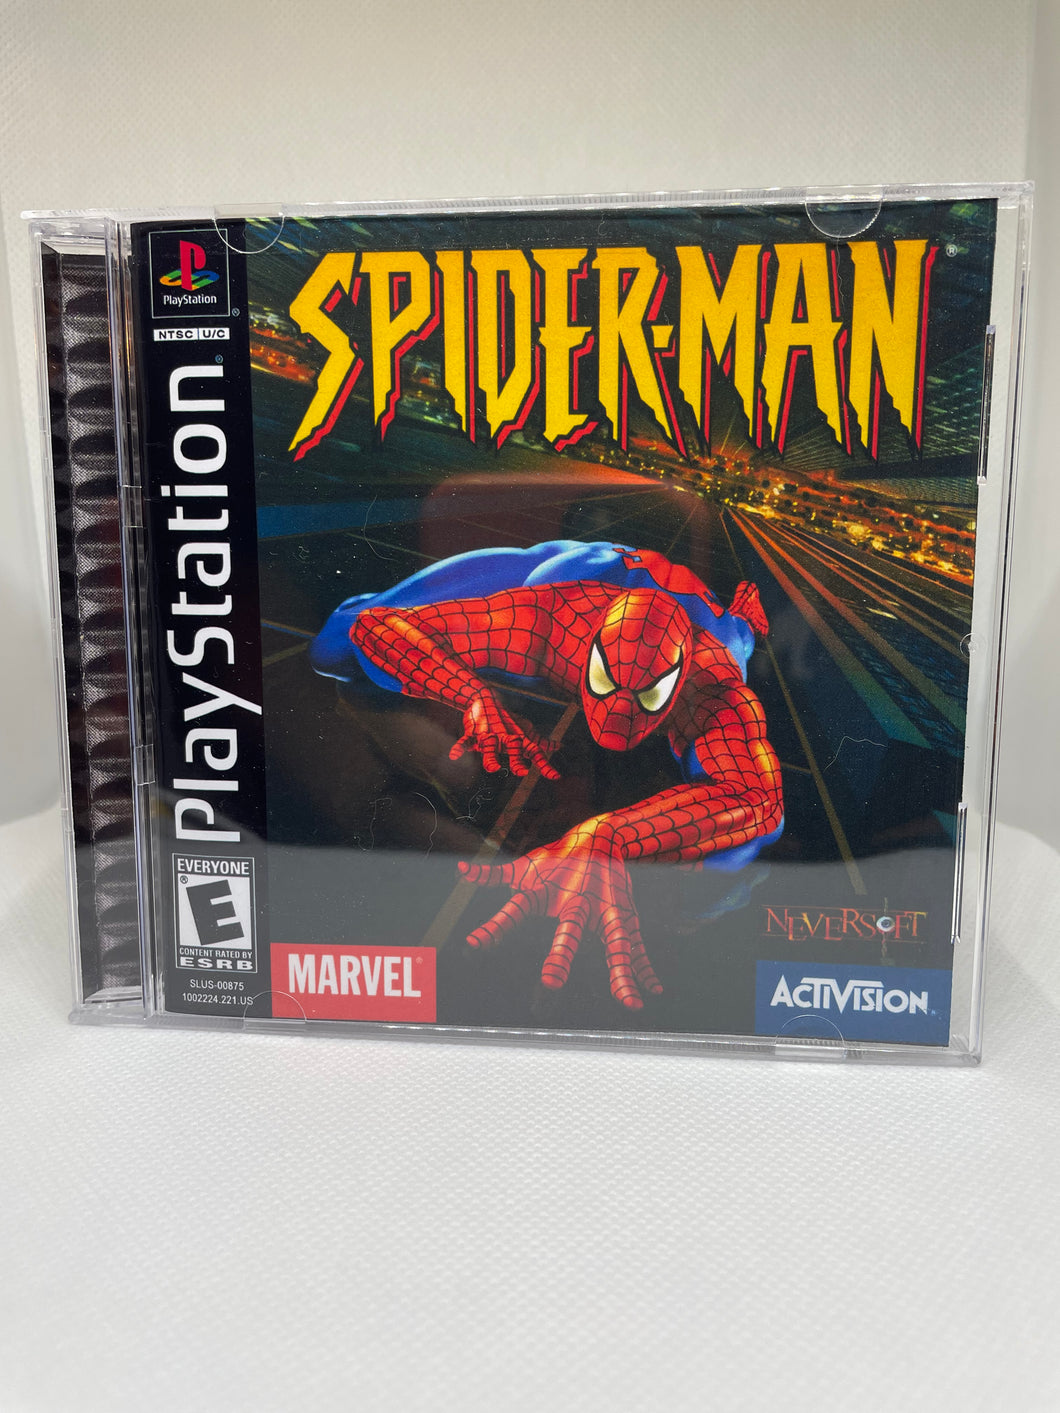 Spider-Man Series PS1 Reproduction Case